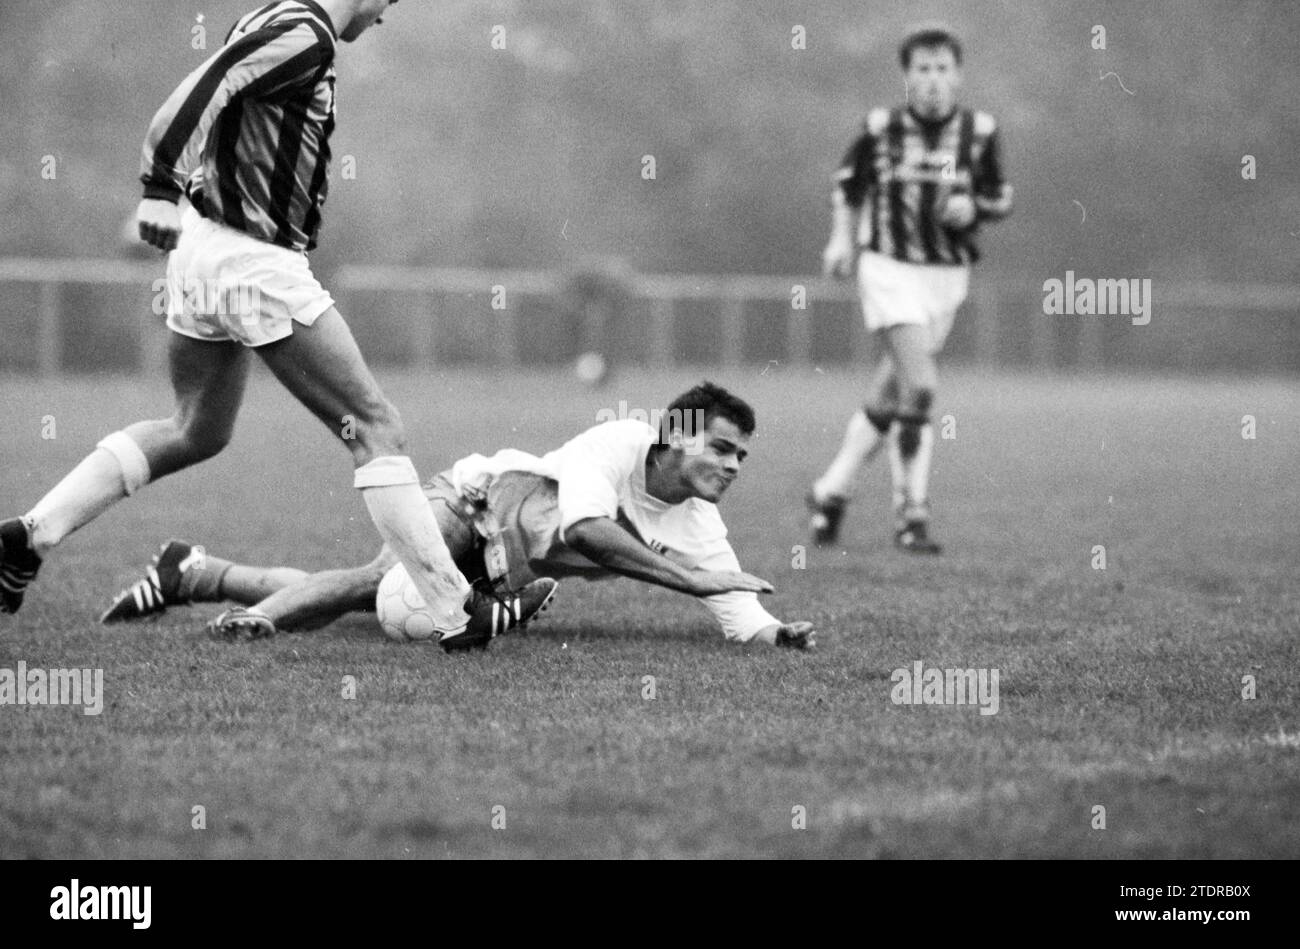 VEW - RCH, Football, 15-10-1988, Whizgle News from the Past, Tailored for the Future. Explore historical narratives, Dutch The Netherlands agency image with a modern perspective, bridging the gap between yesterday's events and tomorrow's insights. A timeless journey shaping the stories that shape our future Stock Photo